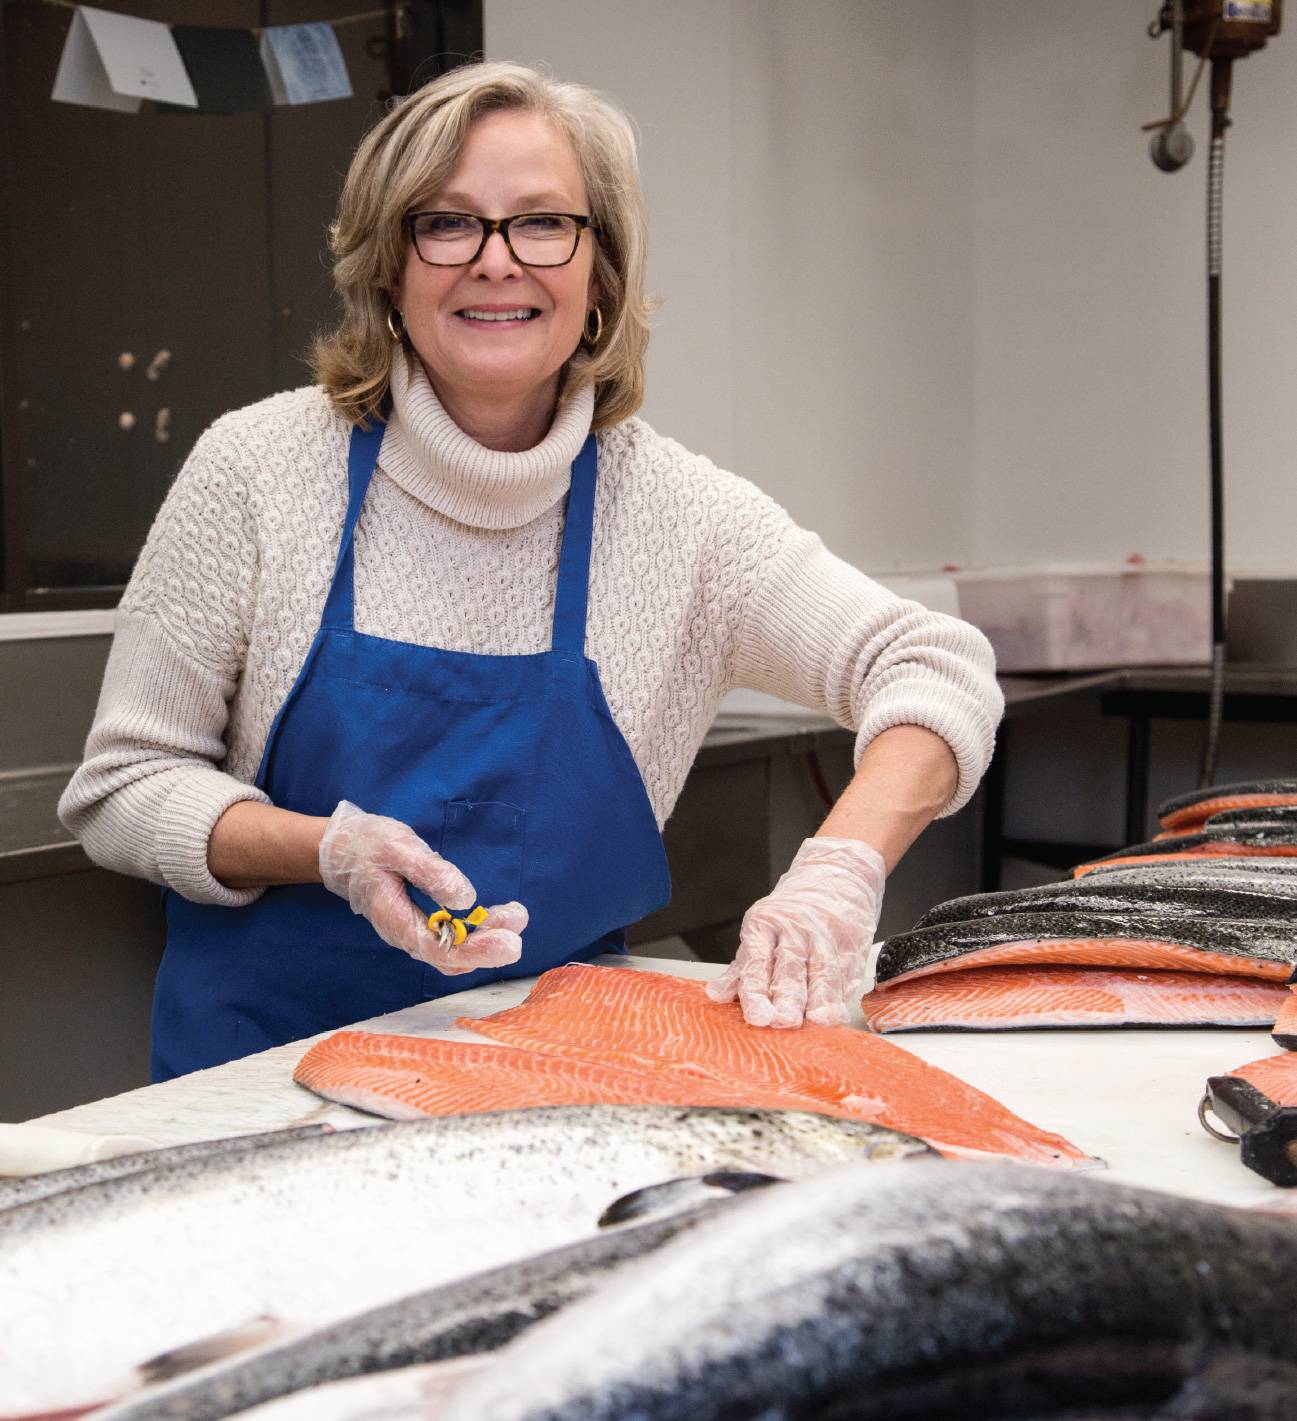 women cleans and prepares fish in kitchen